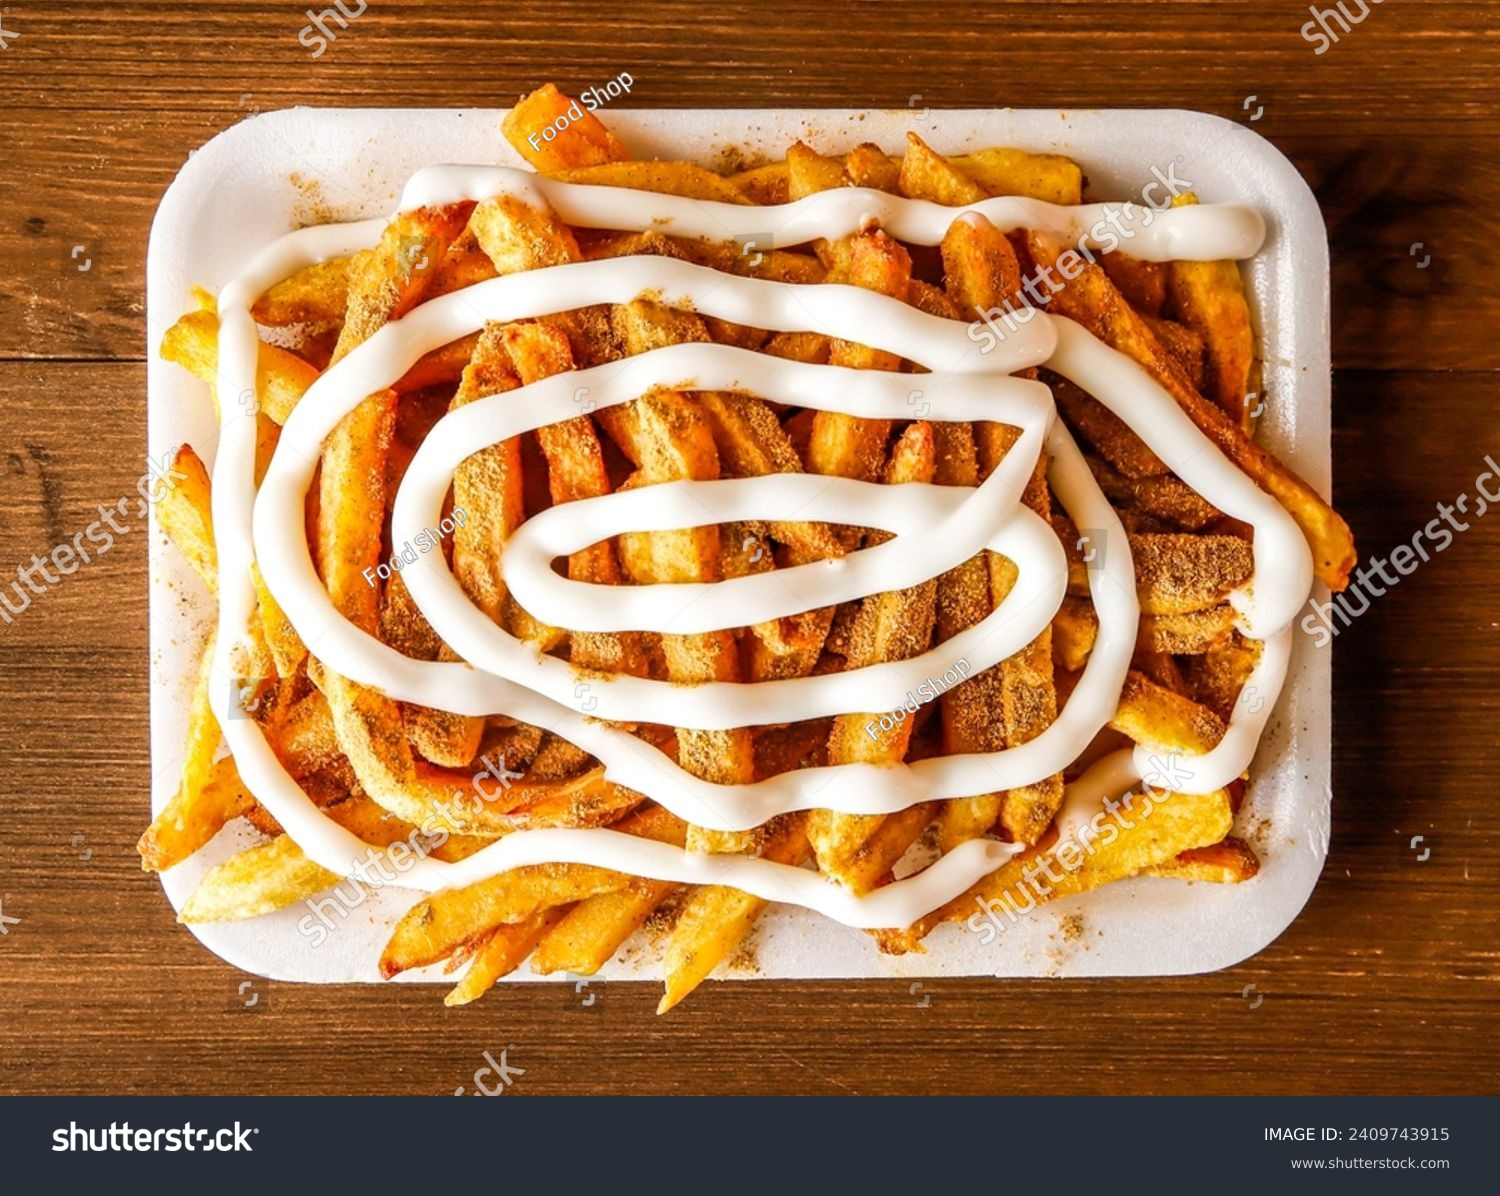 Mayo fries with masala or potato chips loaded with mayonnaise served in dish isolated on wooden background top view of indian spices and pakistani food #2409743915